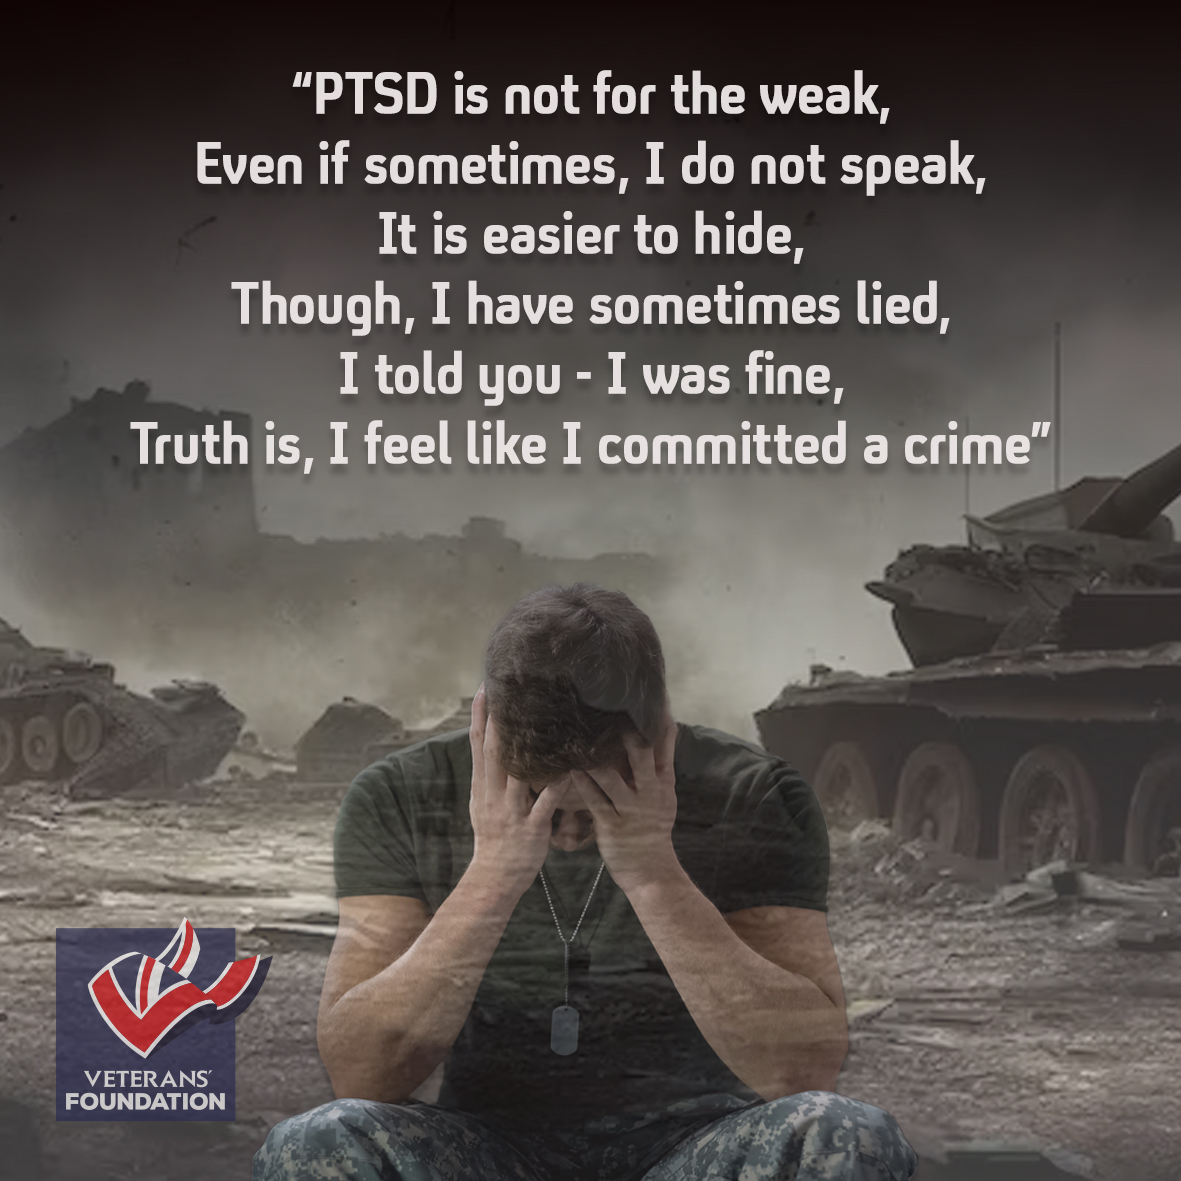 Today marks PTSD Awareness Day, so we share a verse from the poem 'Do you even know' by Amber Guymer-Hosking, a veteran of the British Armed Forces. #PTSDAwarenessDay